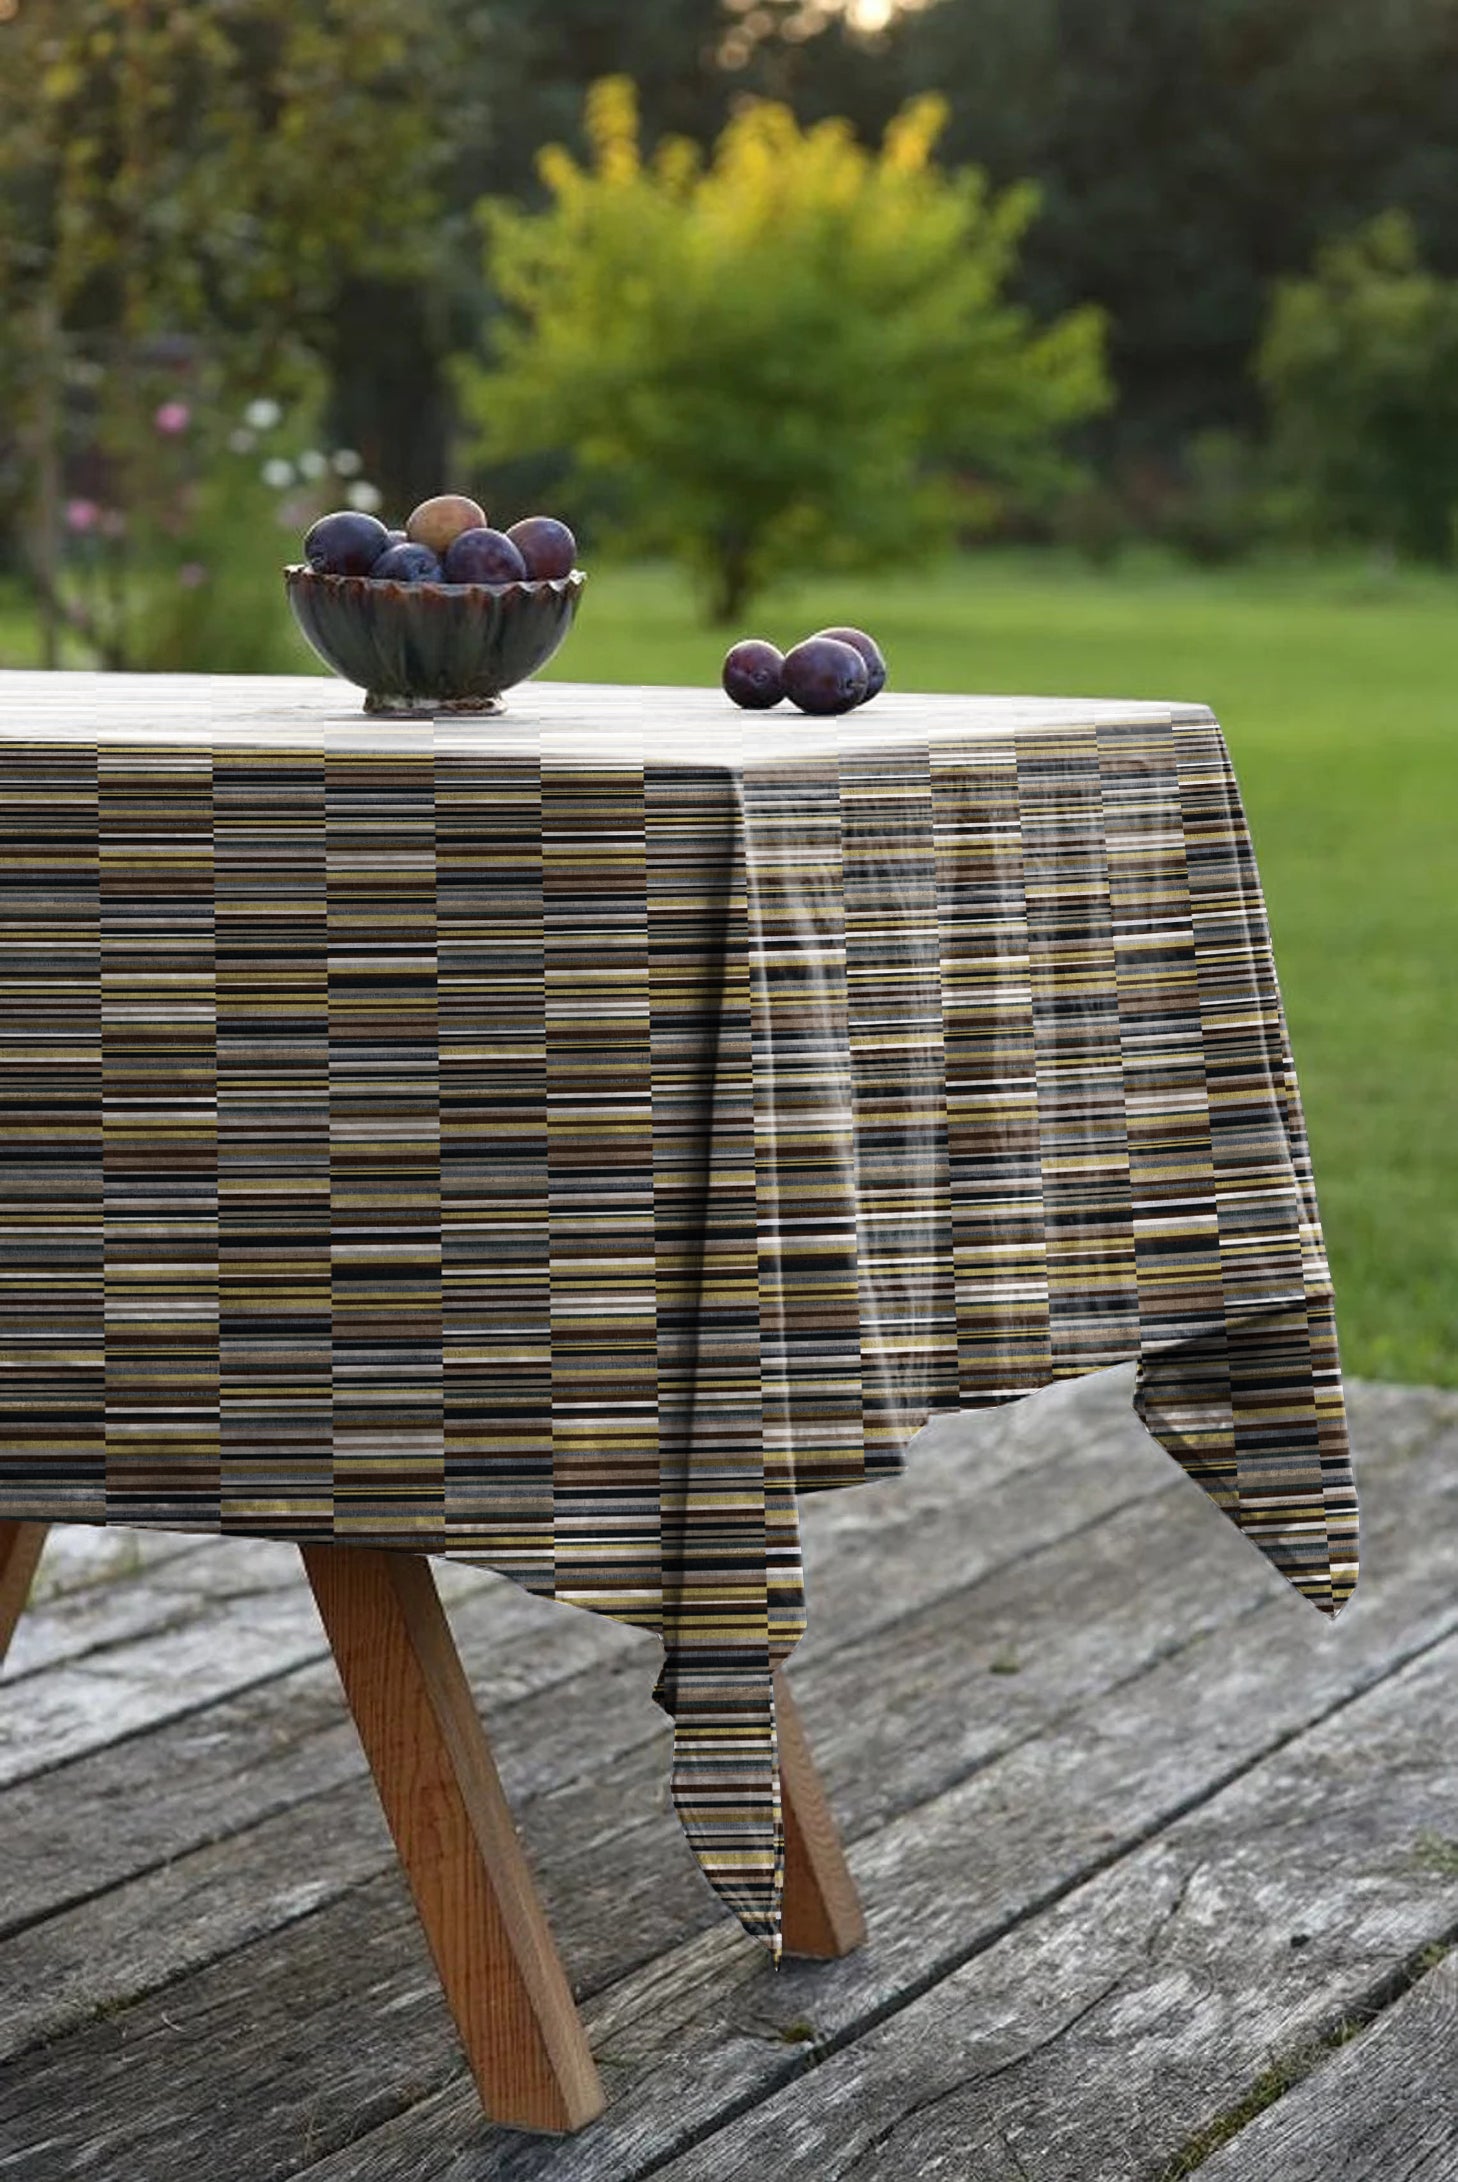 ILLUSION DASH 6 SEATER TABLE CLOTH BROWN/YELLOW